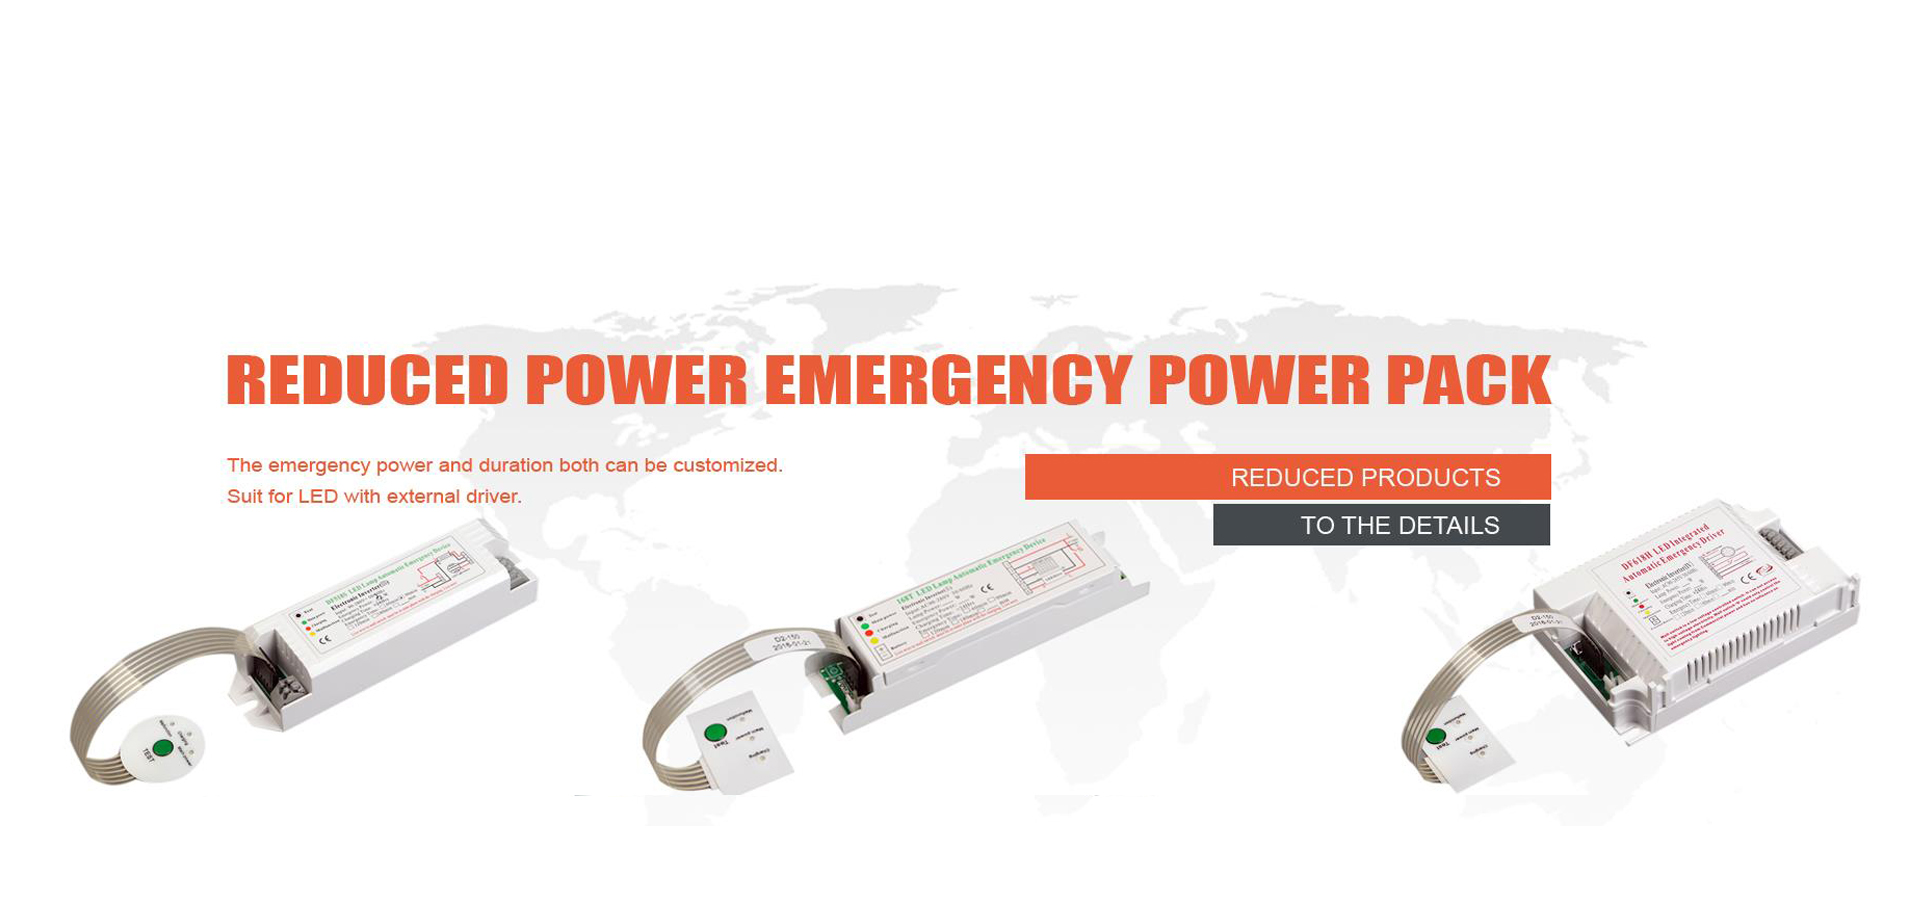 POWER POWER EMERGENCRED REDUCED